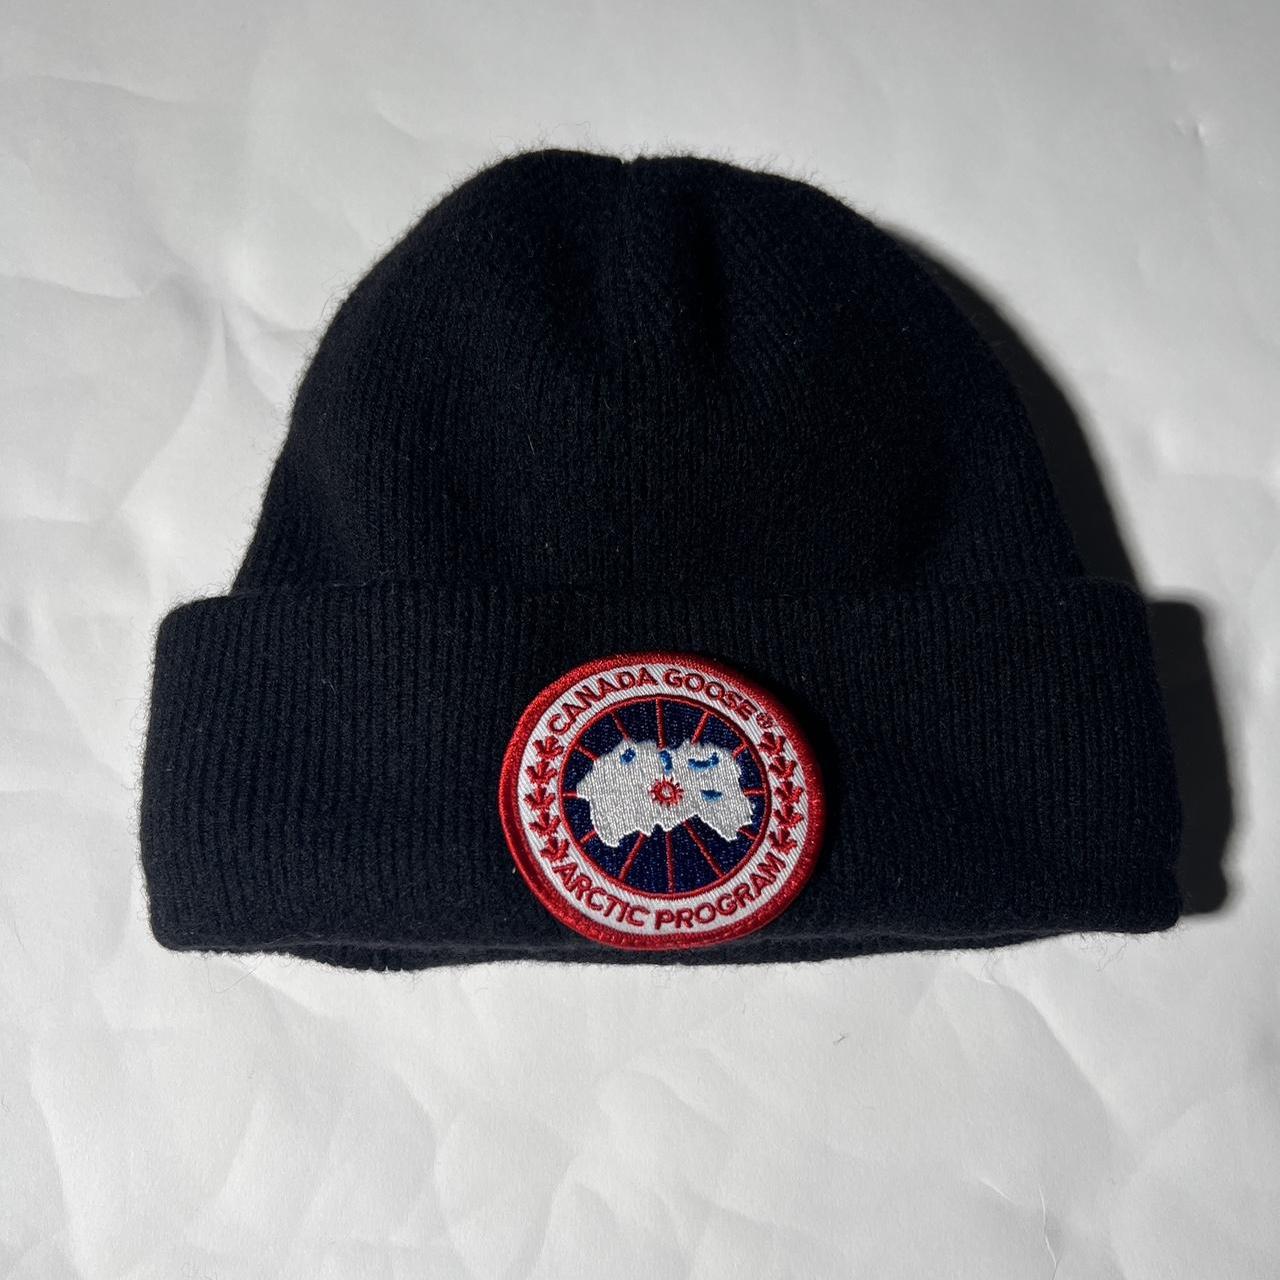 Canada Goose Men's Black and Red Hat - 1